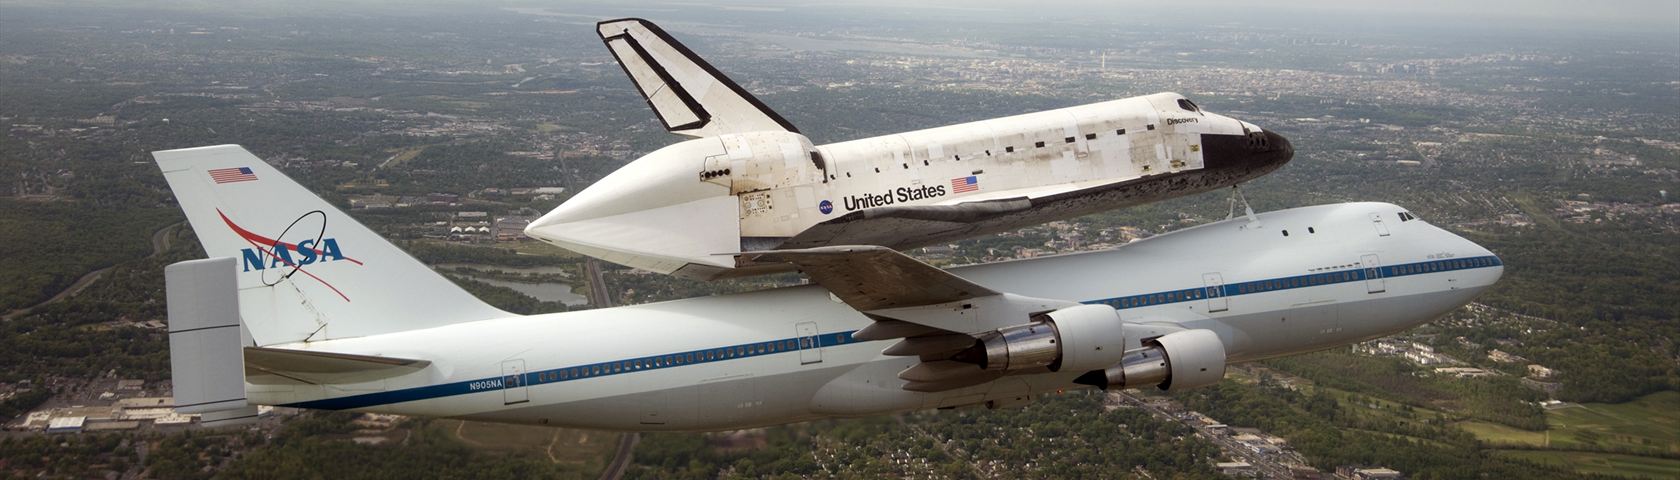 747 and Discovery #1